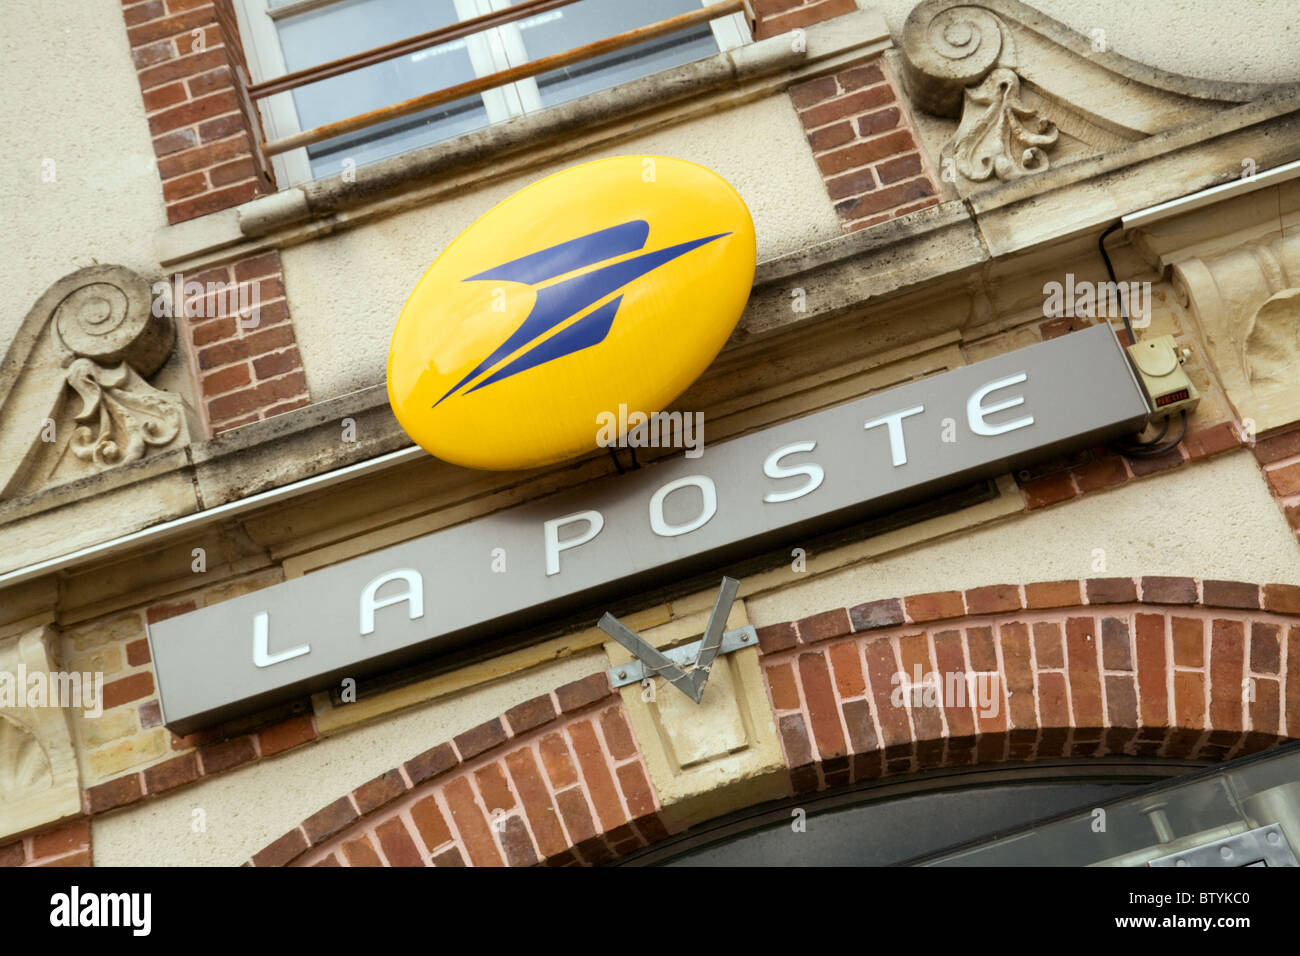 French Post Office (Bureau de Poste, La Poste) sign on the building in Coulommiers, Northern France Stock Photo